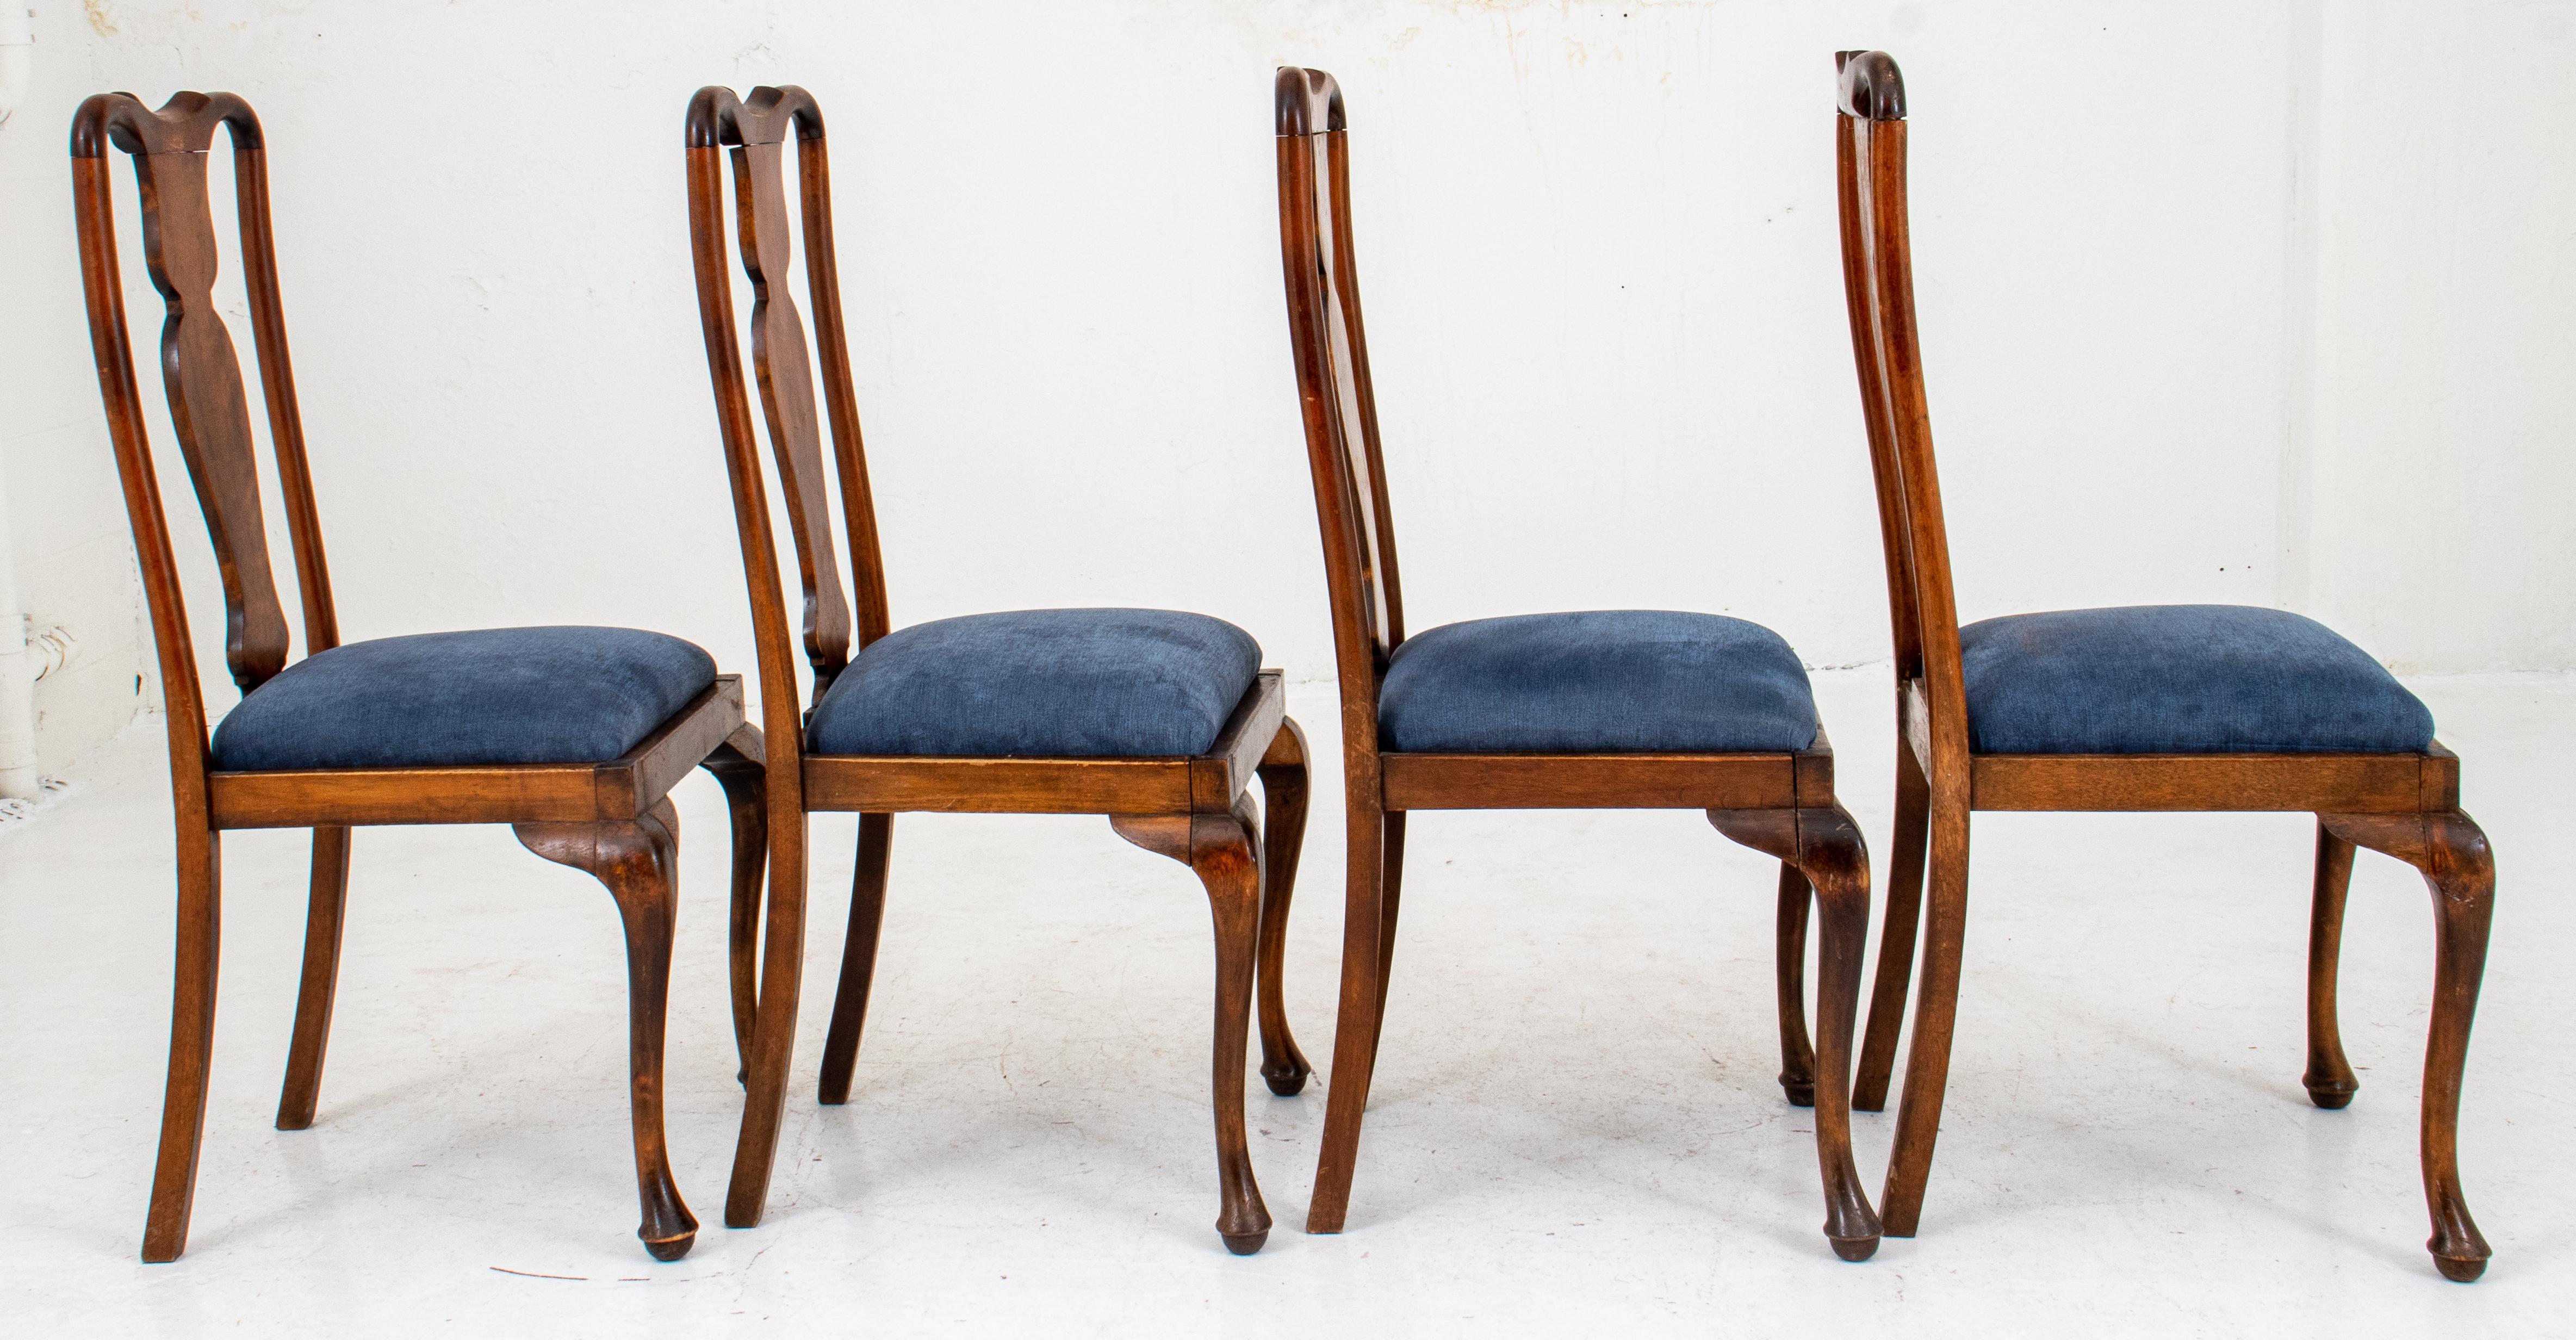 20th Century Queen Anne Style Dining Chairs, 4